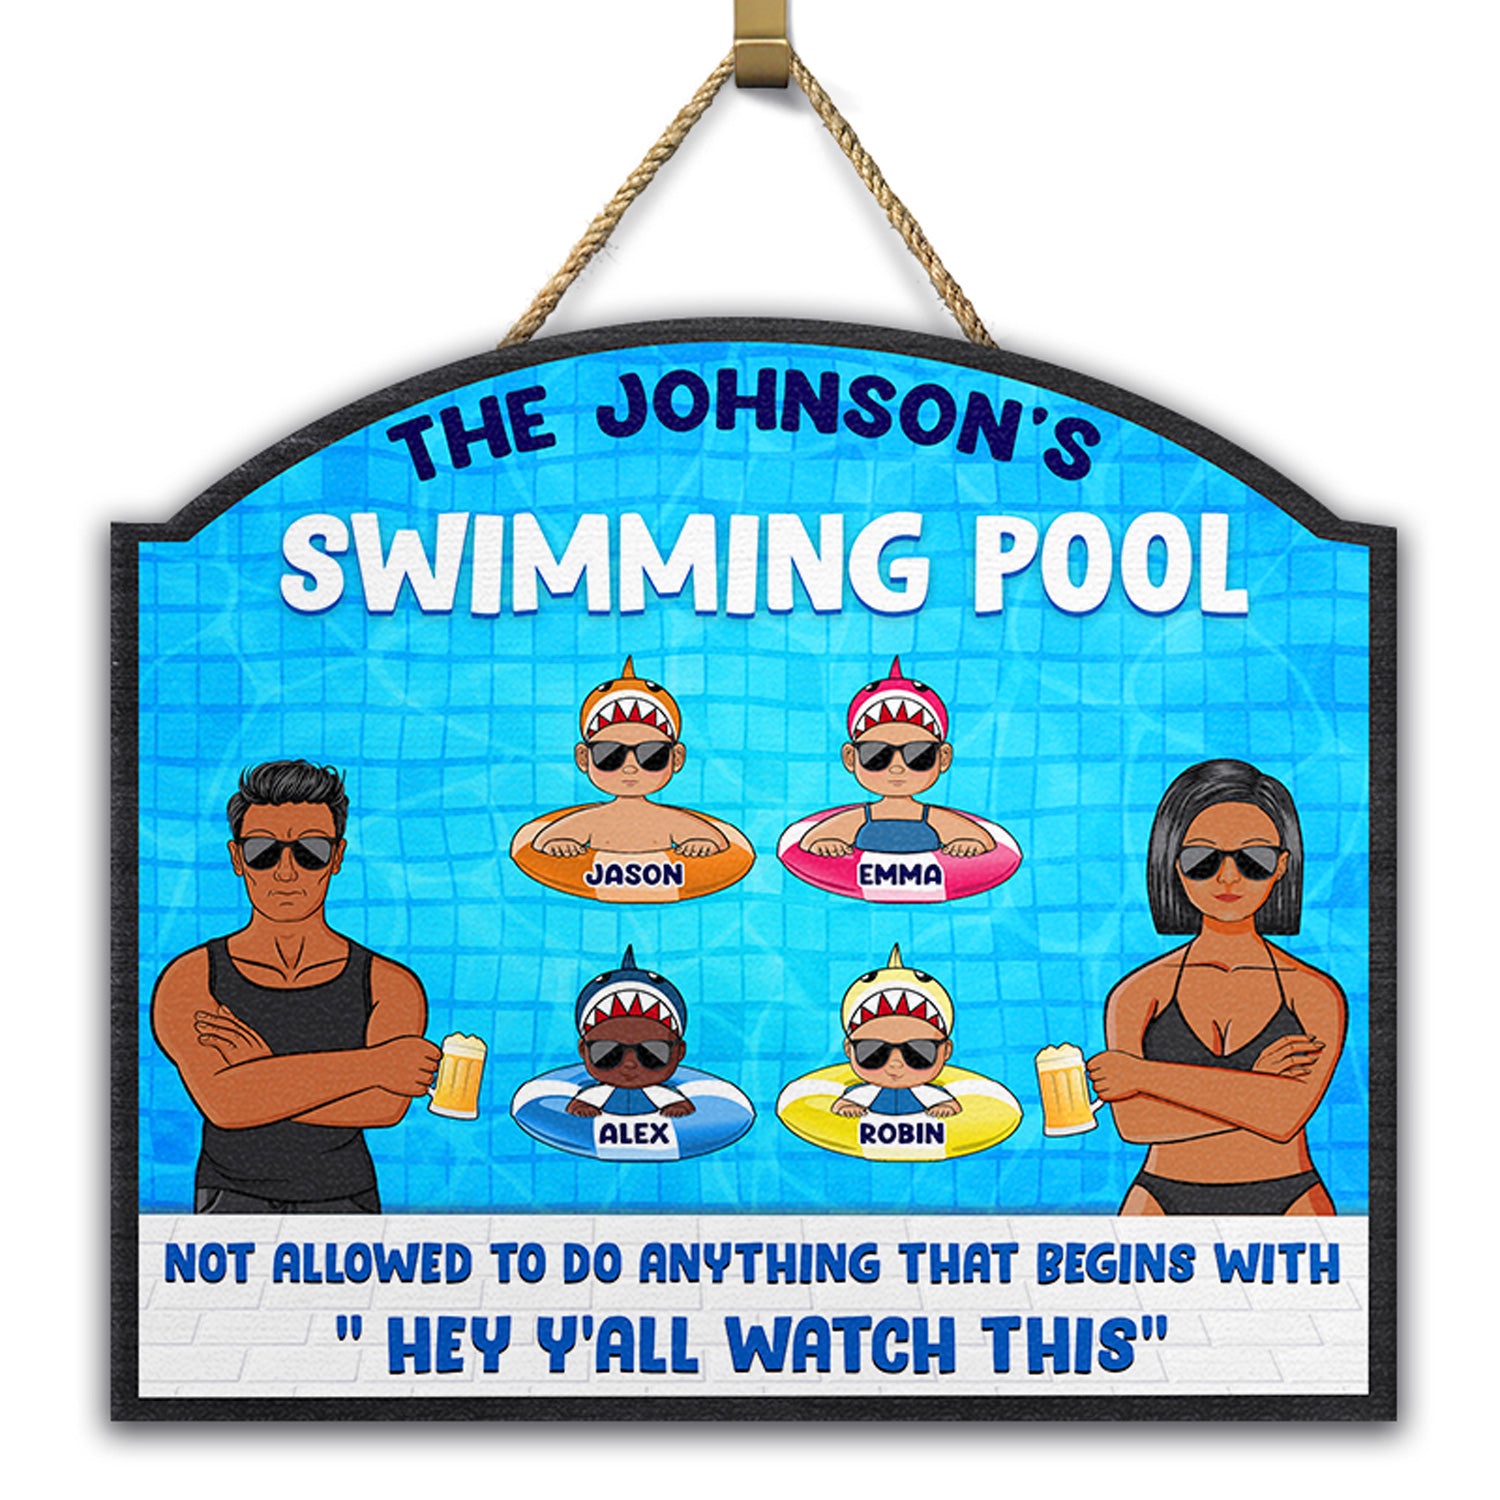 Pool Warning Not Allowed To Do Anything Begins With Watch This - Funny Decor For Pool, Home Decor, Funny Pool Sign - Personalized Custom Shaped Wood Sign